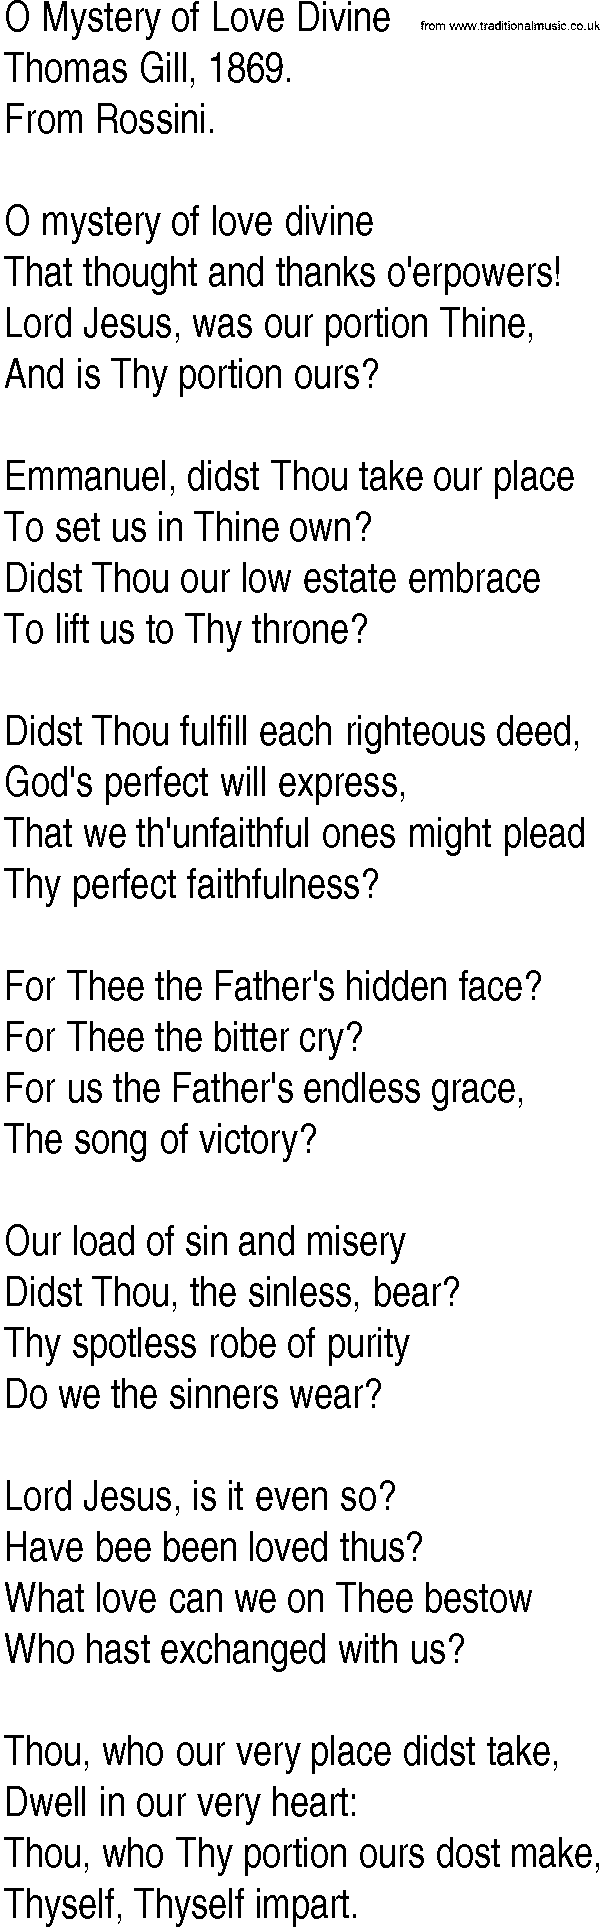 Hymn and Gospel Song: O Mystery of Love Divine by Thomas Gill lyrics